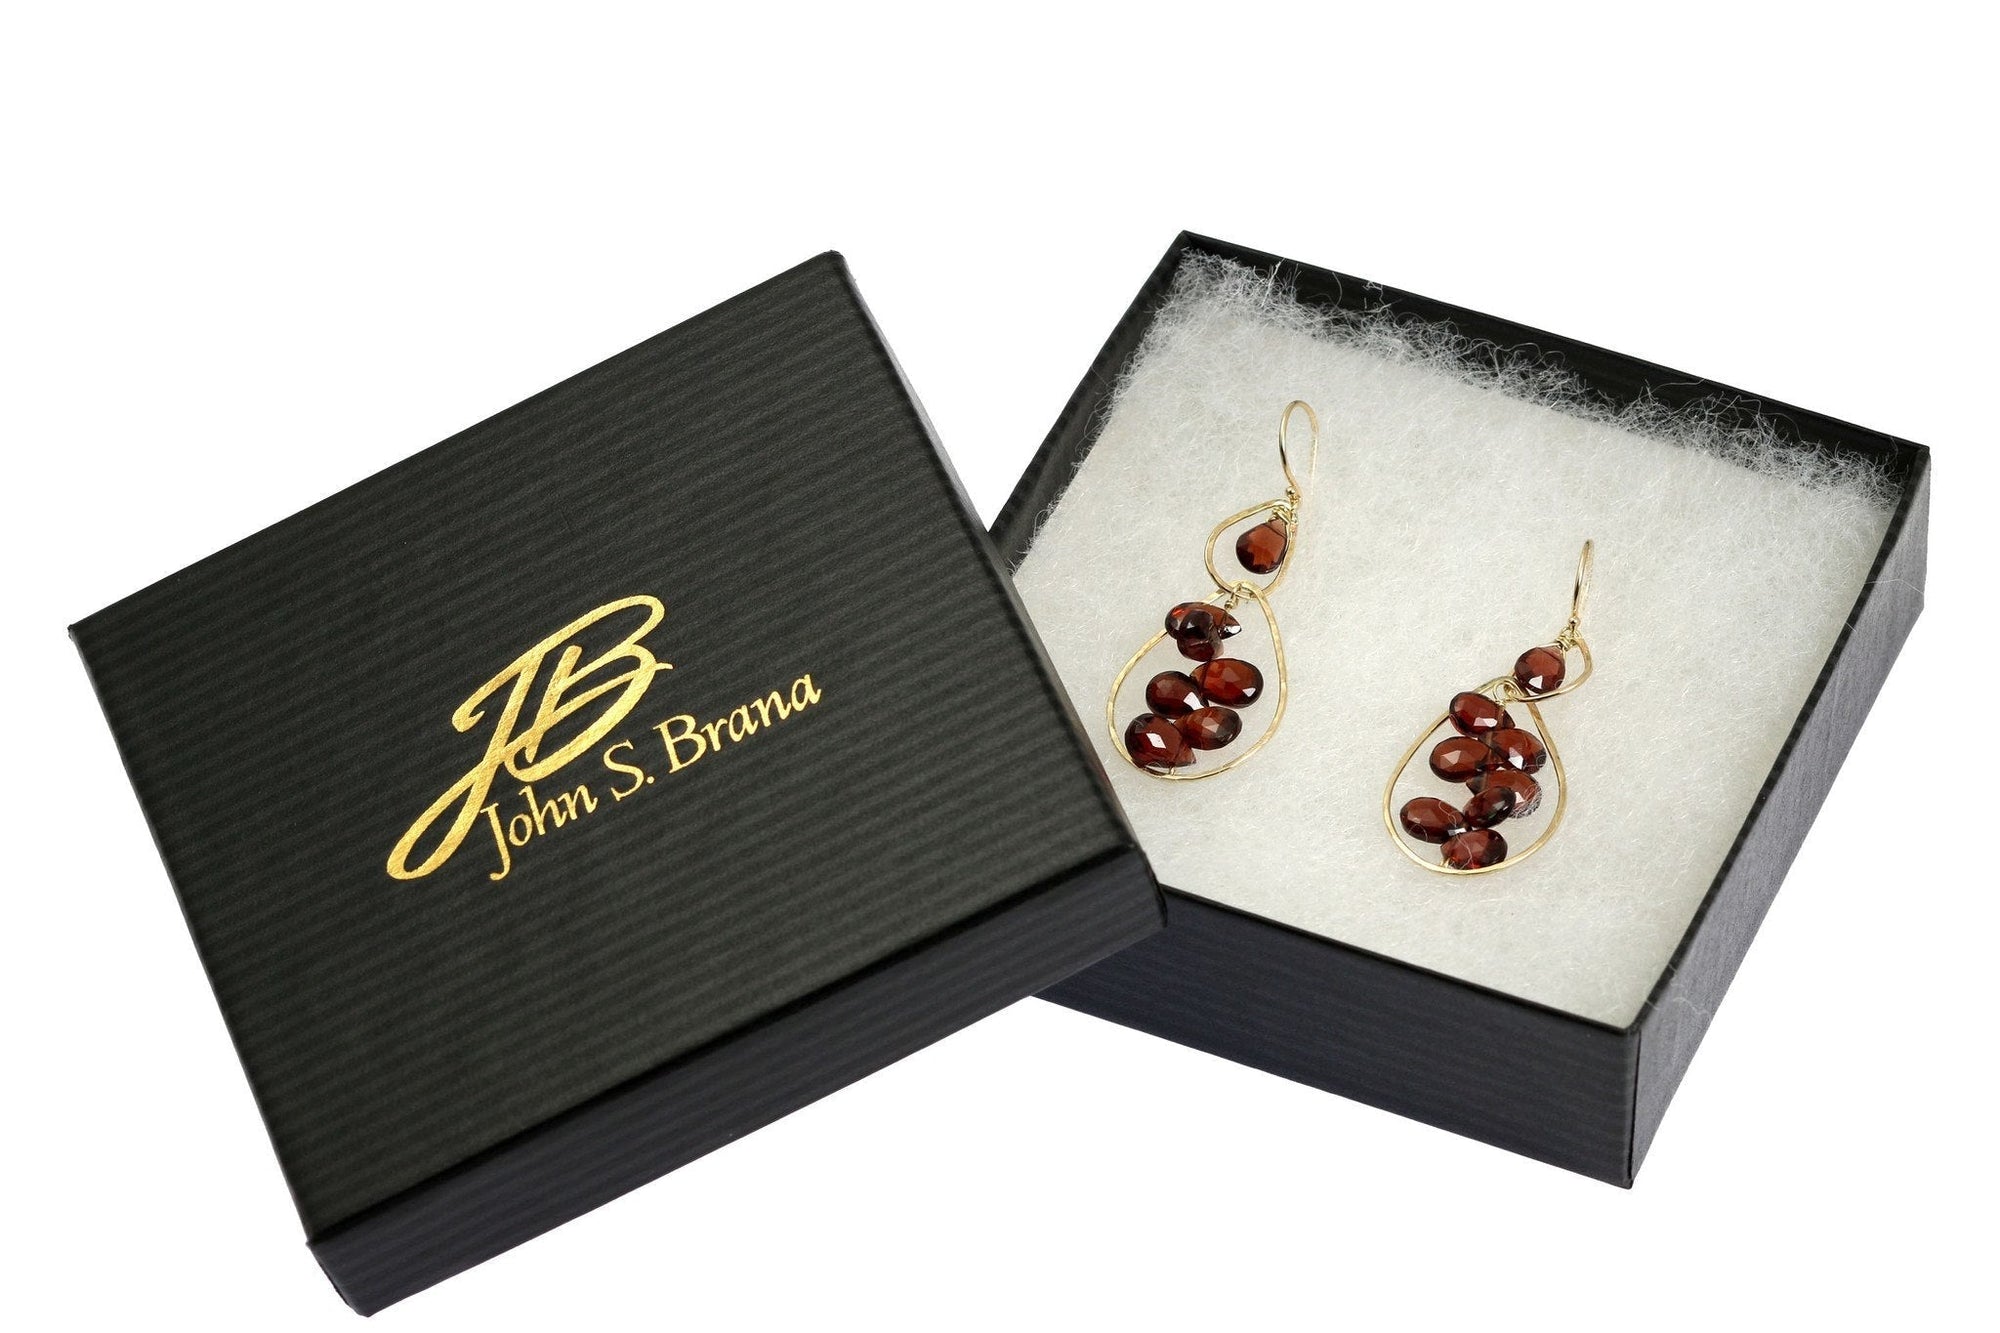 14K Gold Hammered Earrings With Garnets in Black Gift Box